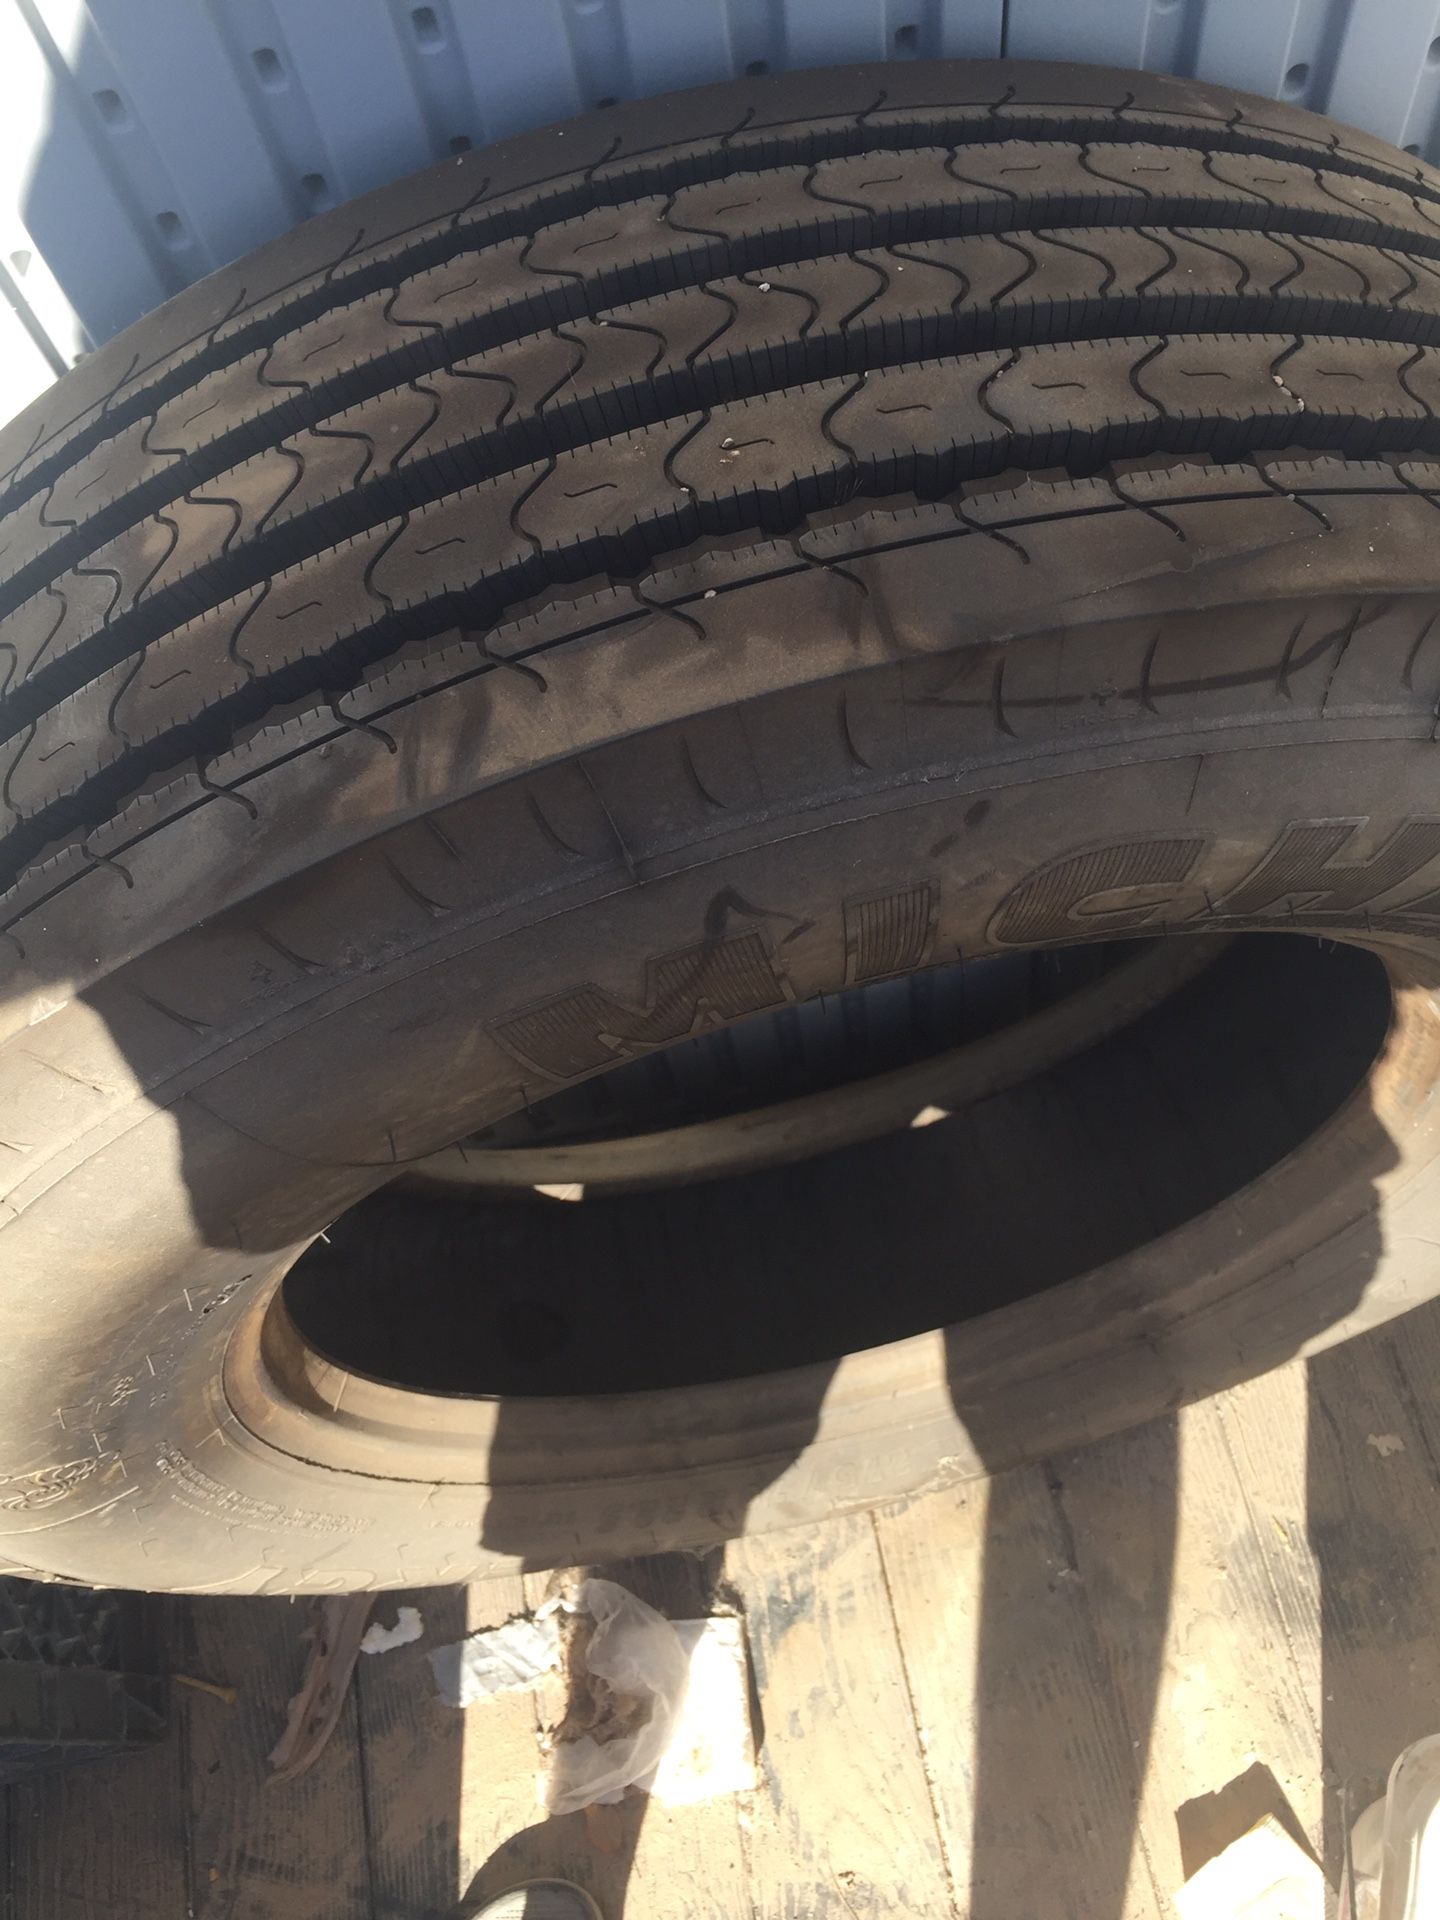 Michelin motorhome tire. Almost new has 200 miles on it. Purchased new for over $700 new. Approximately 3 years ago stored inside since then size is